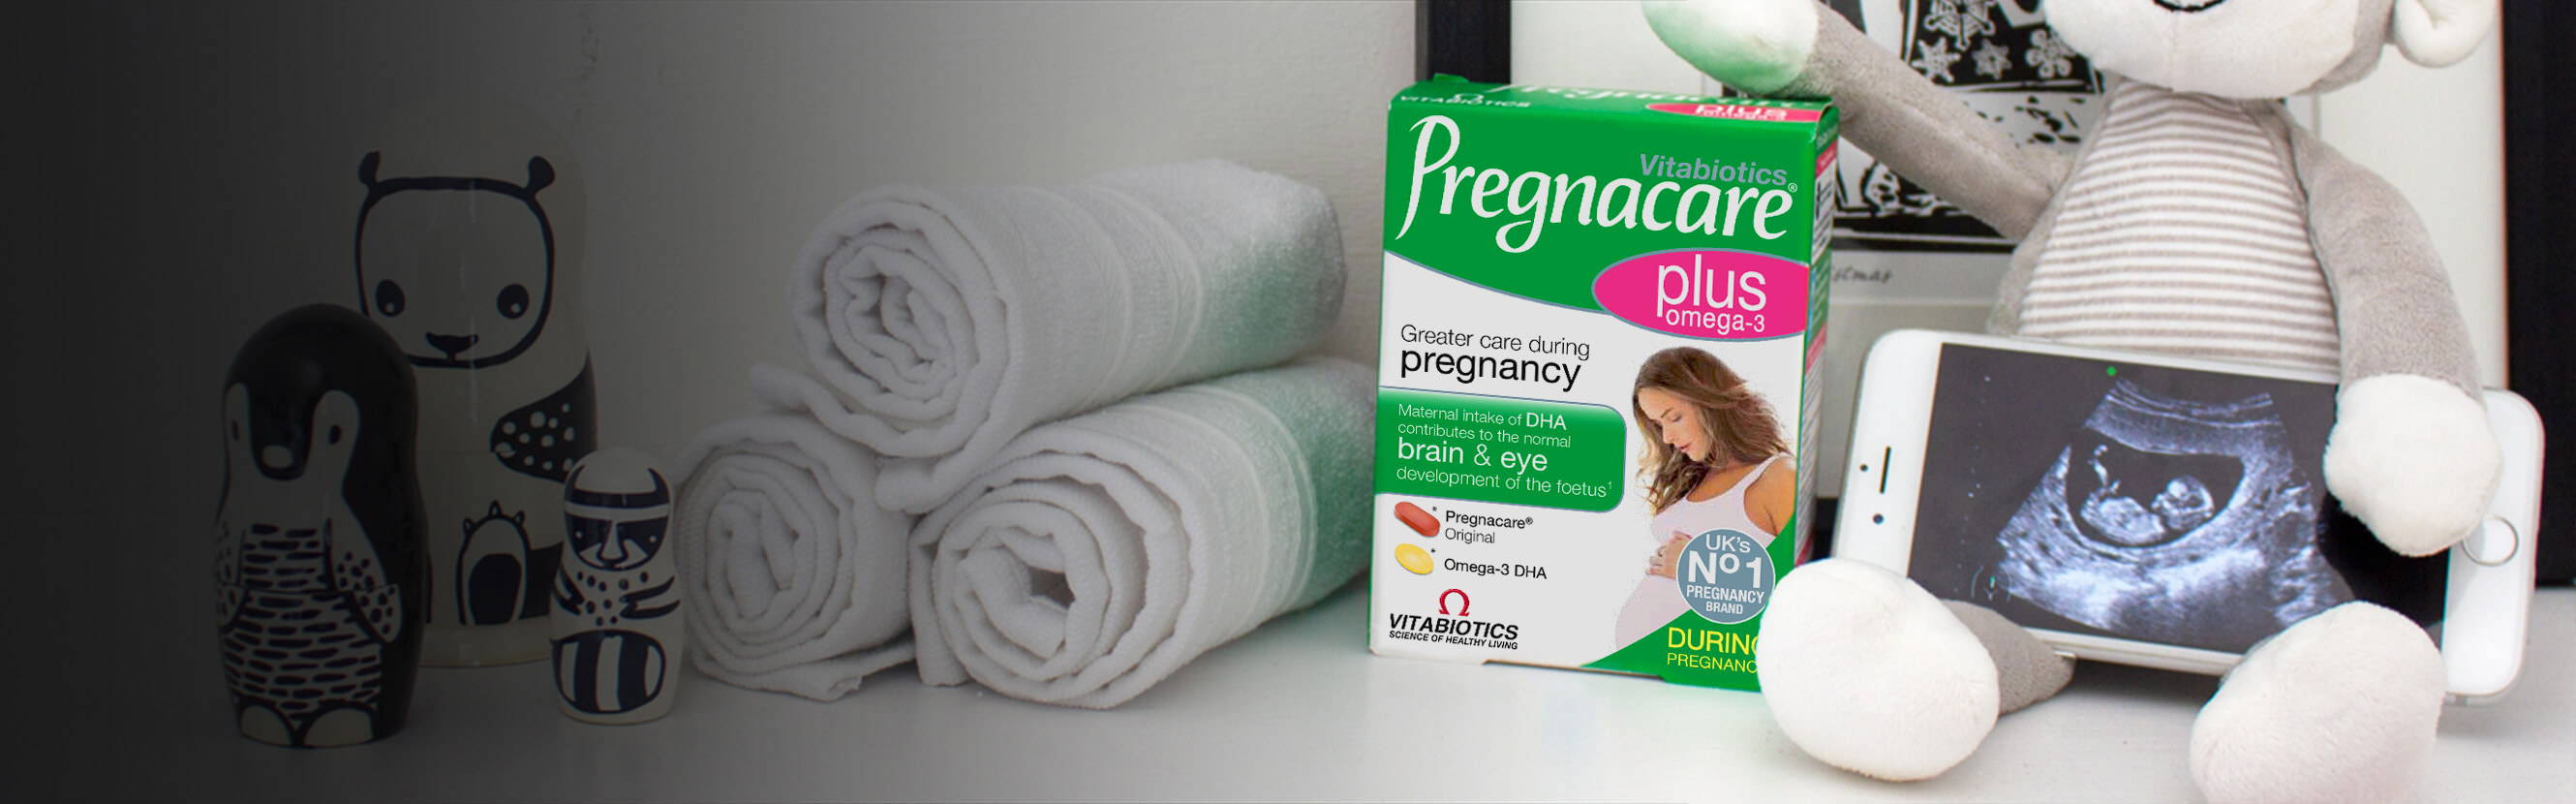  Pregnacare Plus Pack On Table 